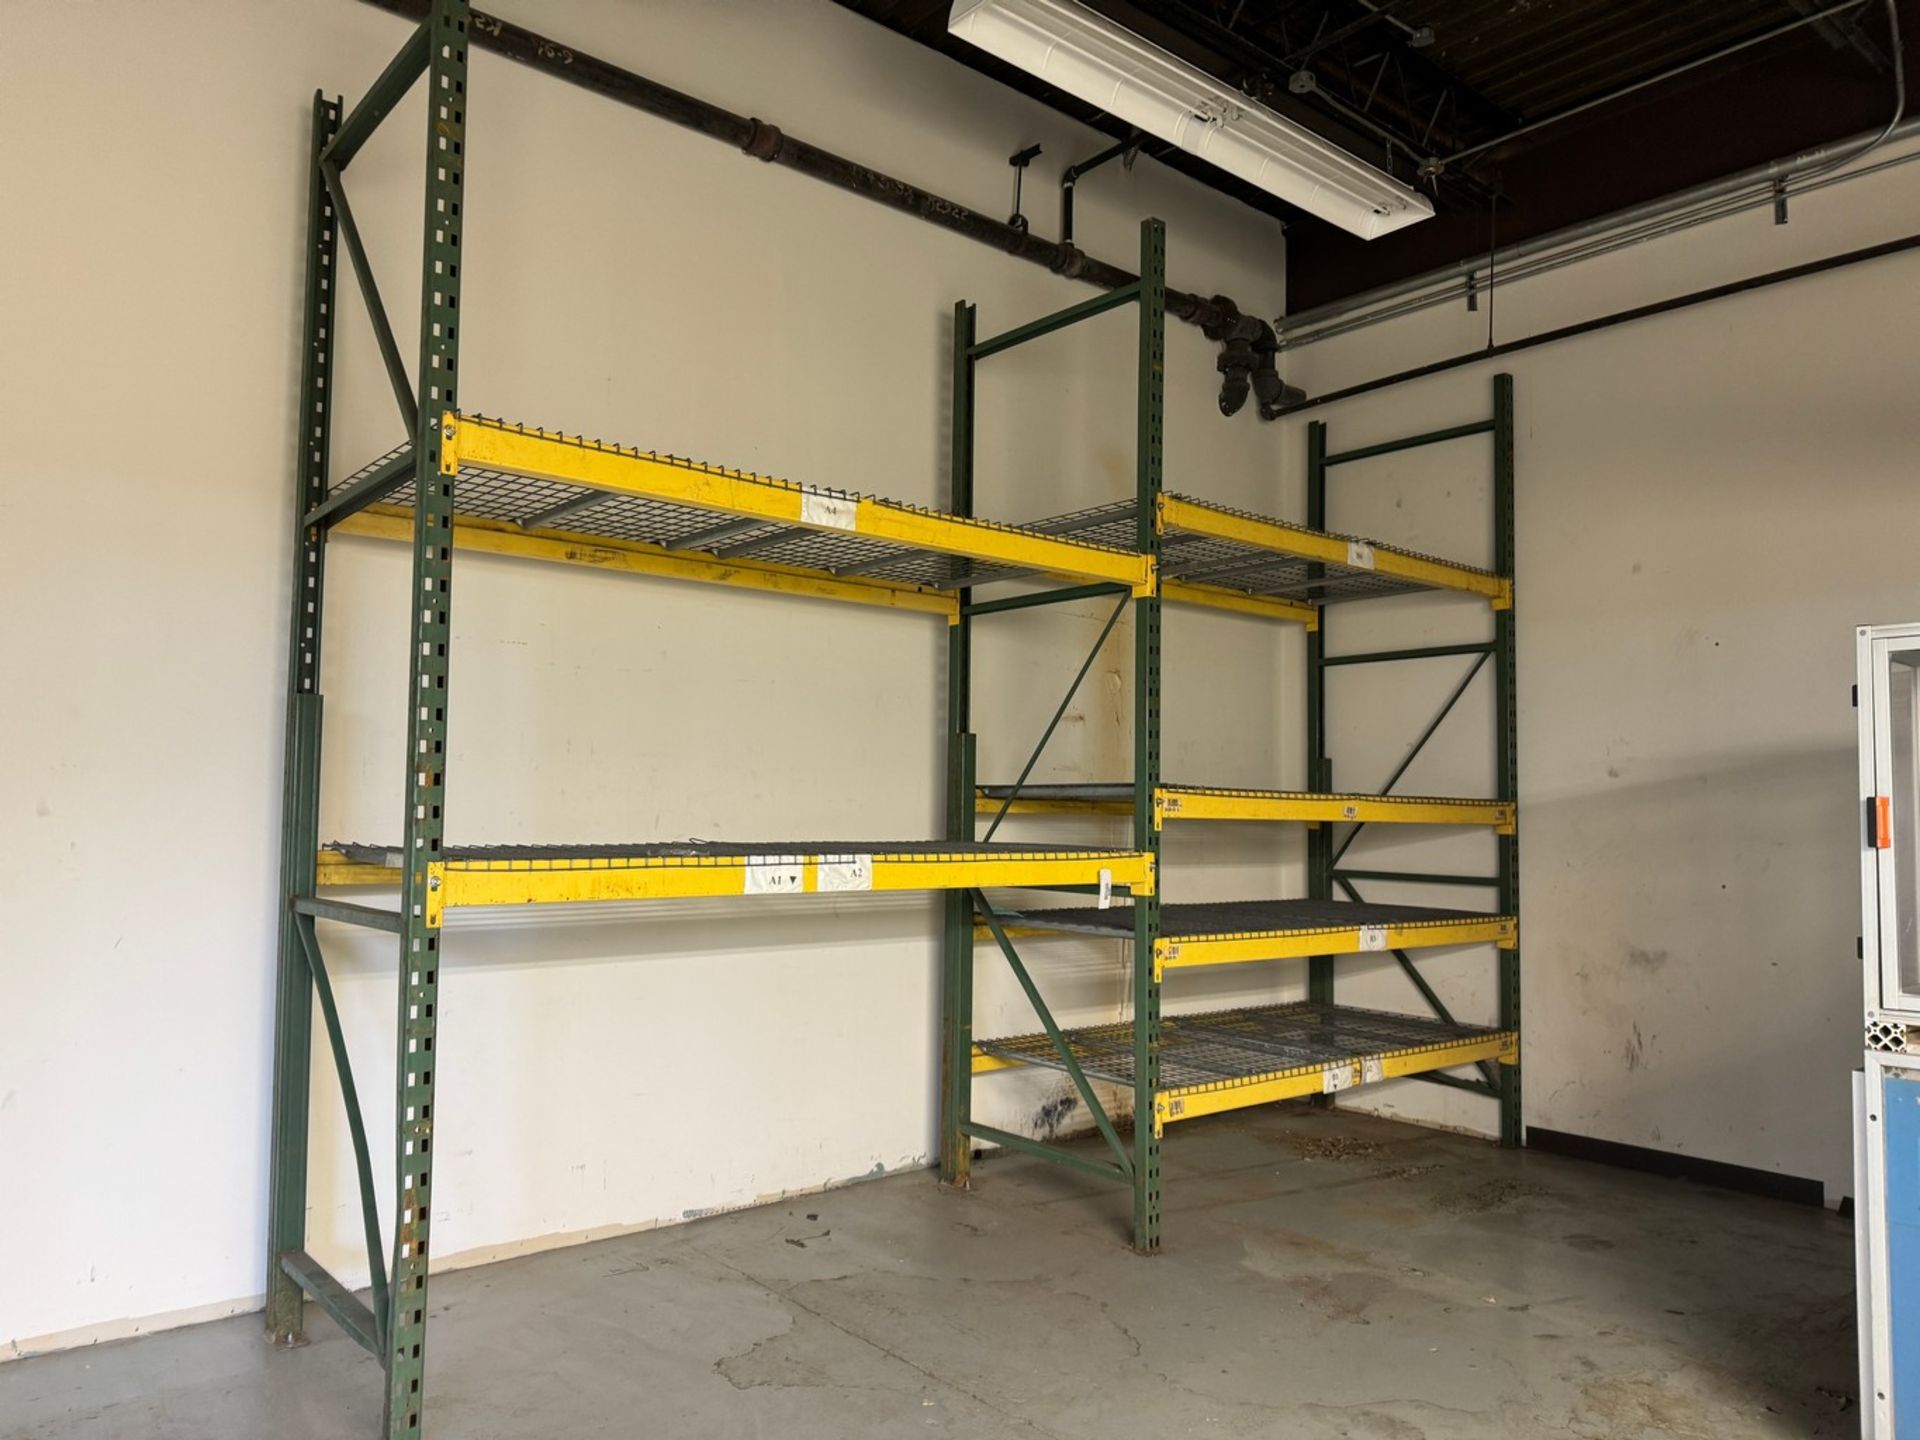 12-Sections Heavy Duty Pallet Racking, 96"W x 44"D x 144"H, 2500 LB Weight Capacity - Image 3 of 3